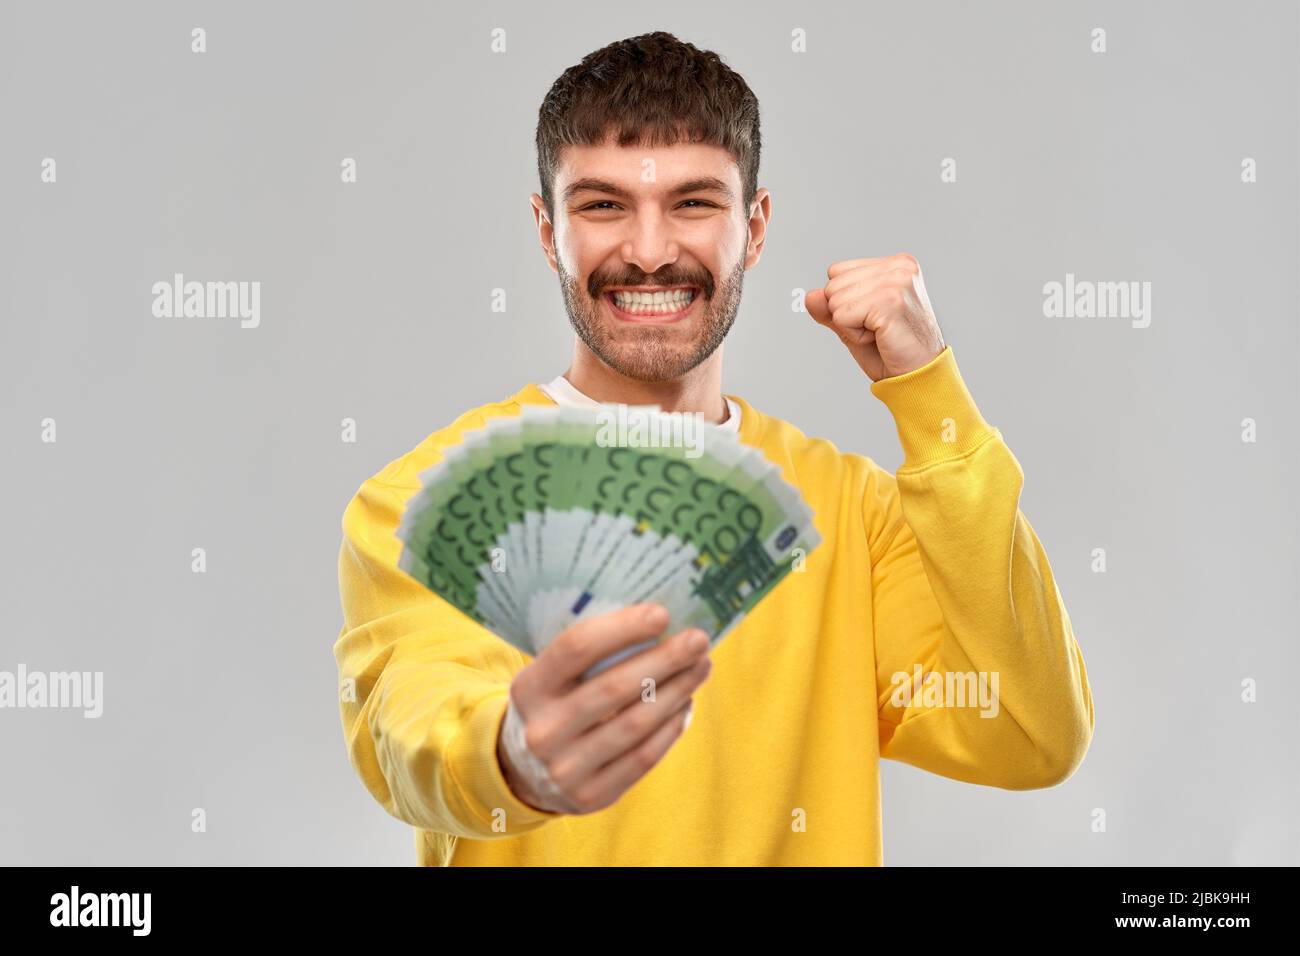 happy young man with money celebrating success Stock Photo